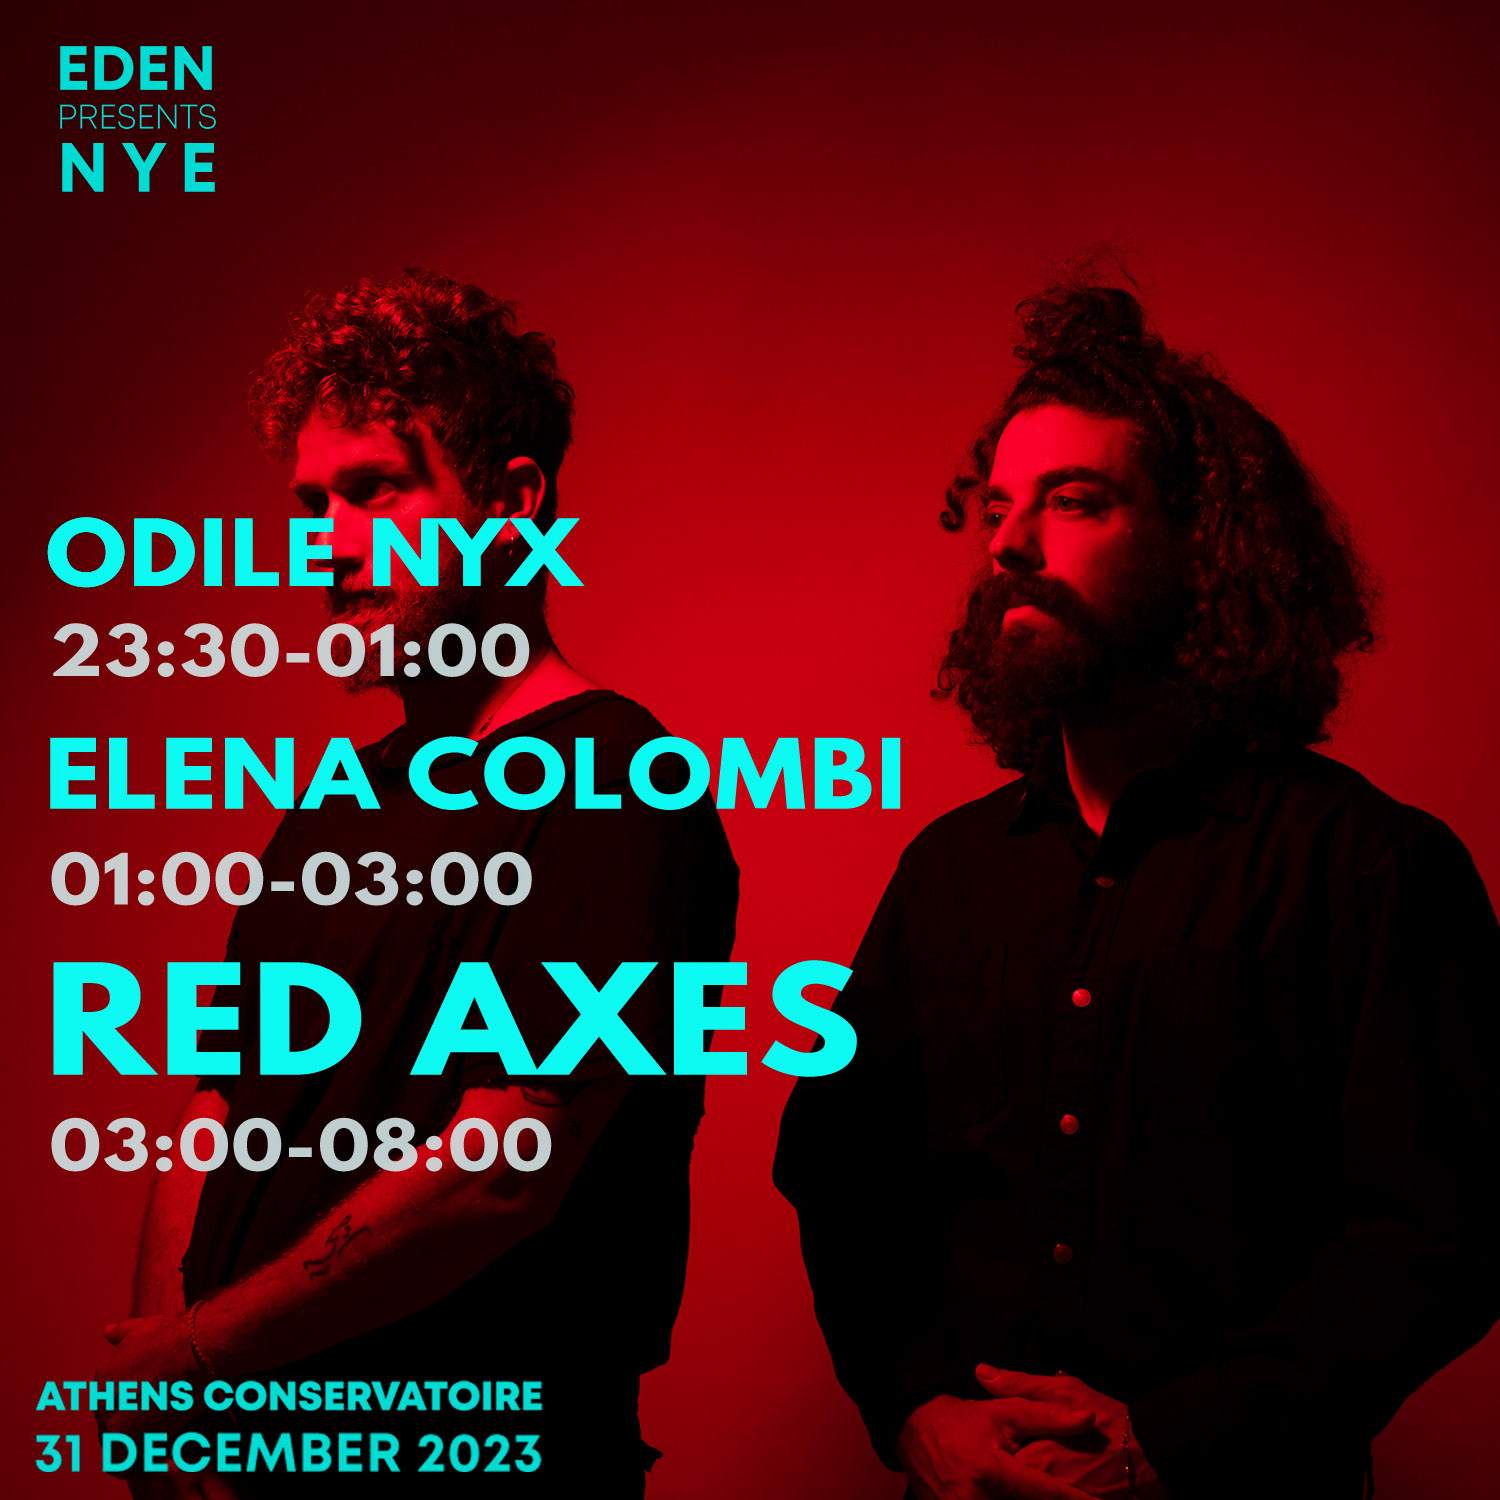 EDEN NYE presents Red Axes - フライヤー表